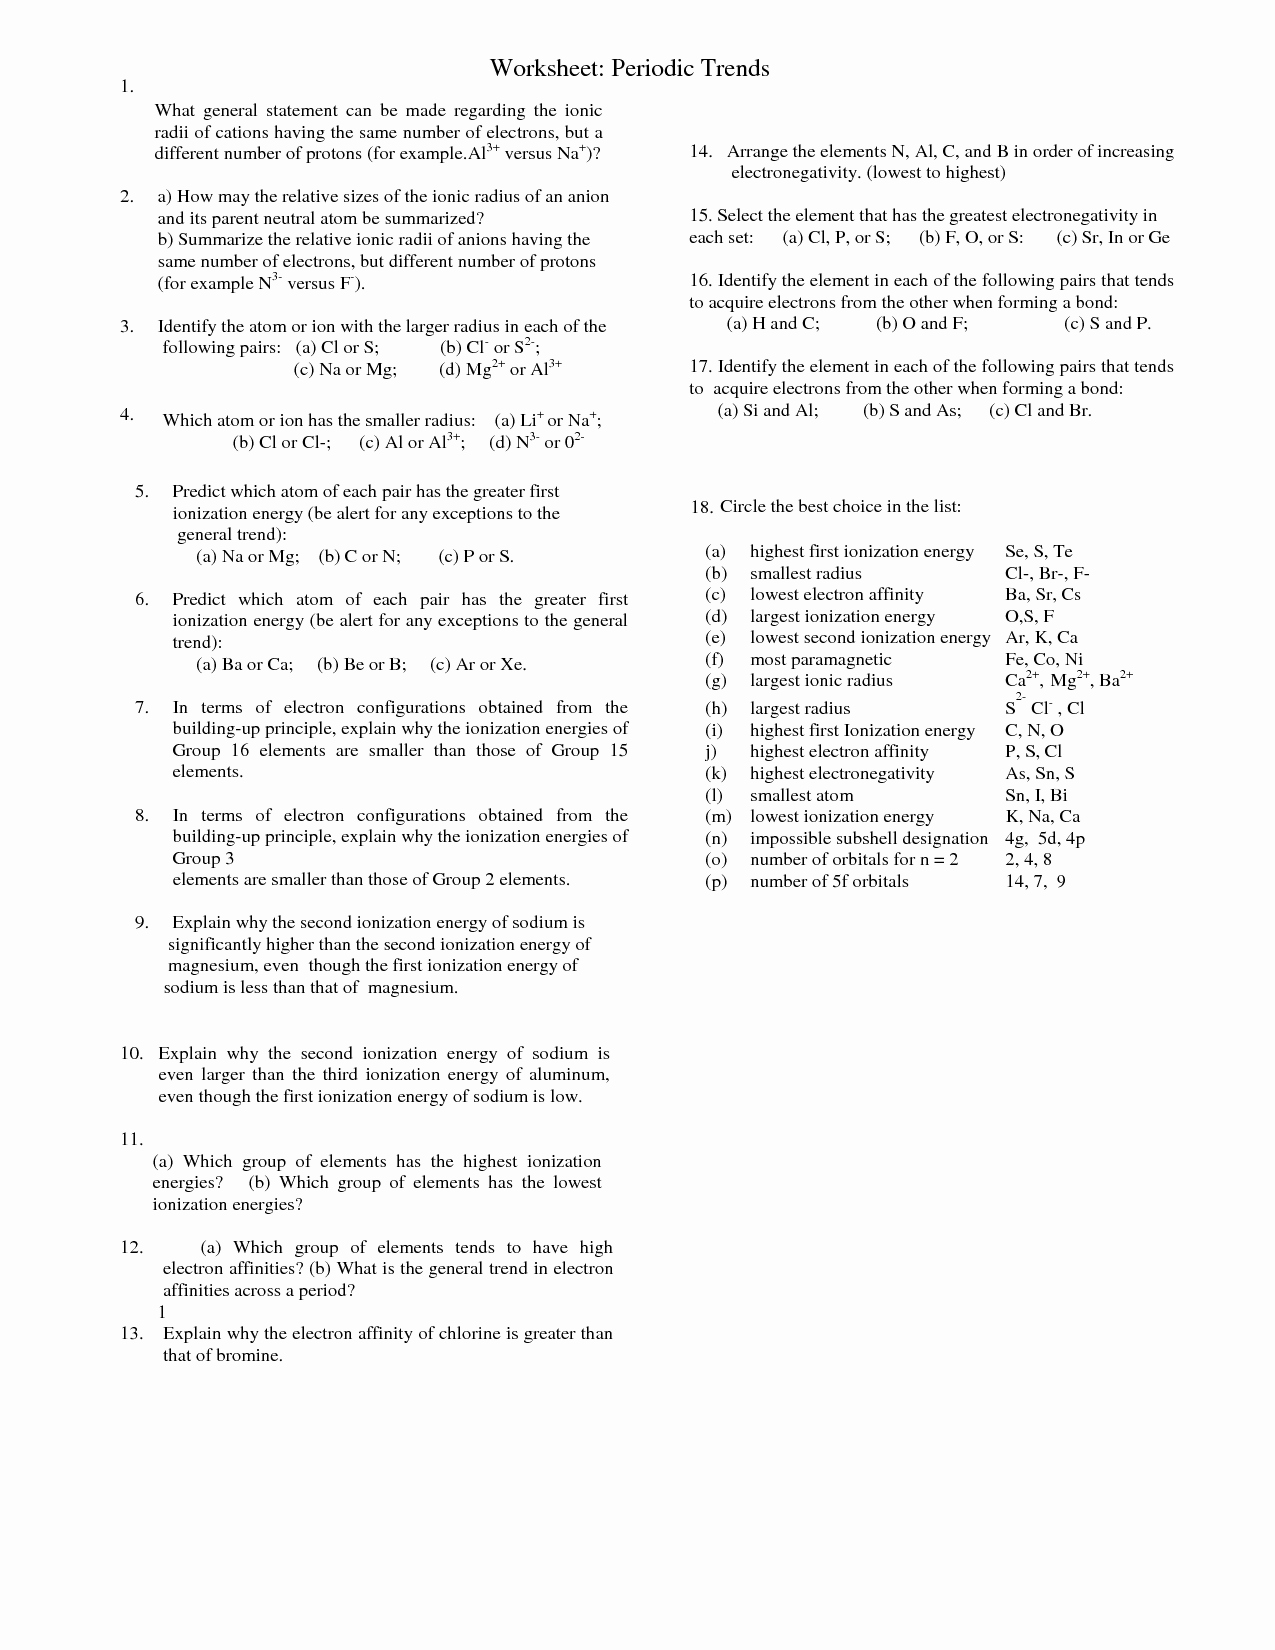 Periodic Trends Practice Worksheet Answers New Periodic Trends Worksheet Answers Driverlayer Search Engine